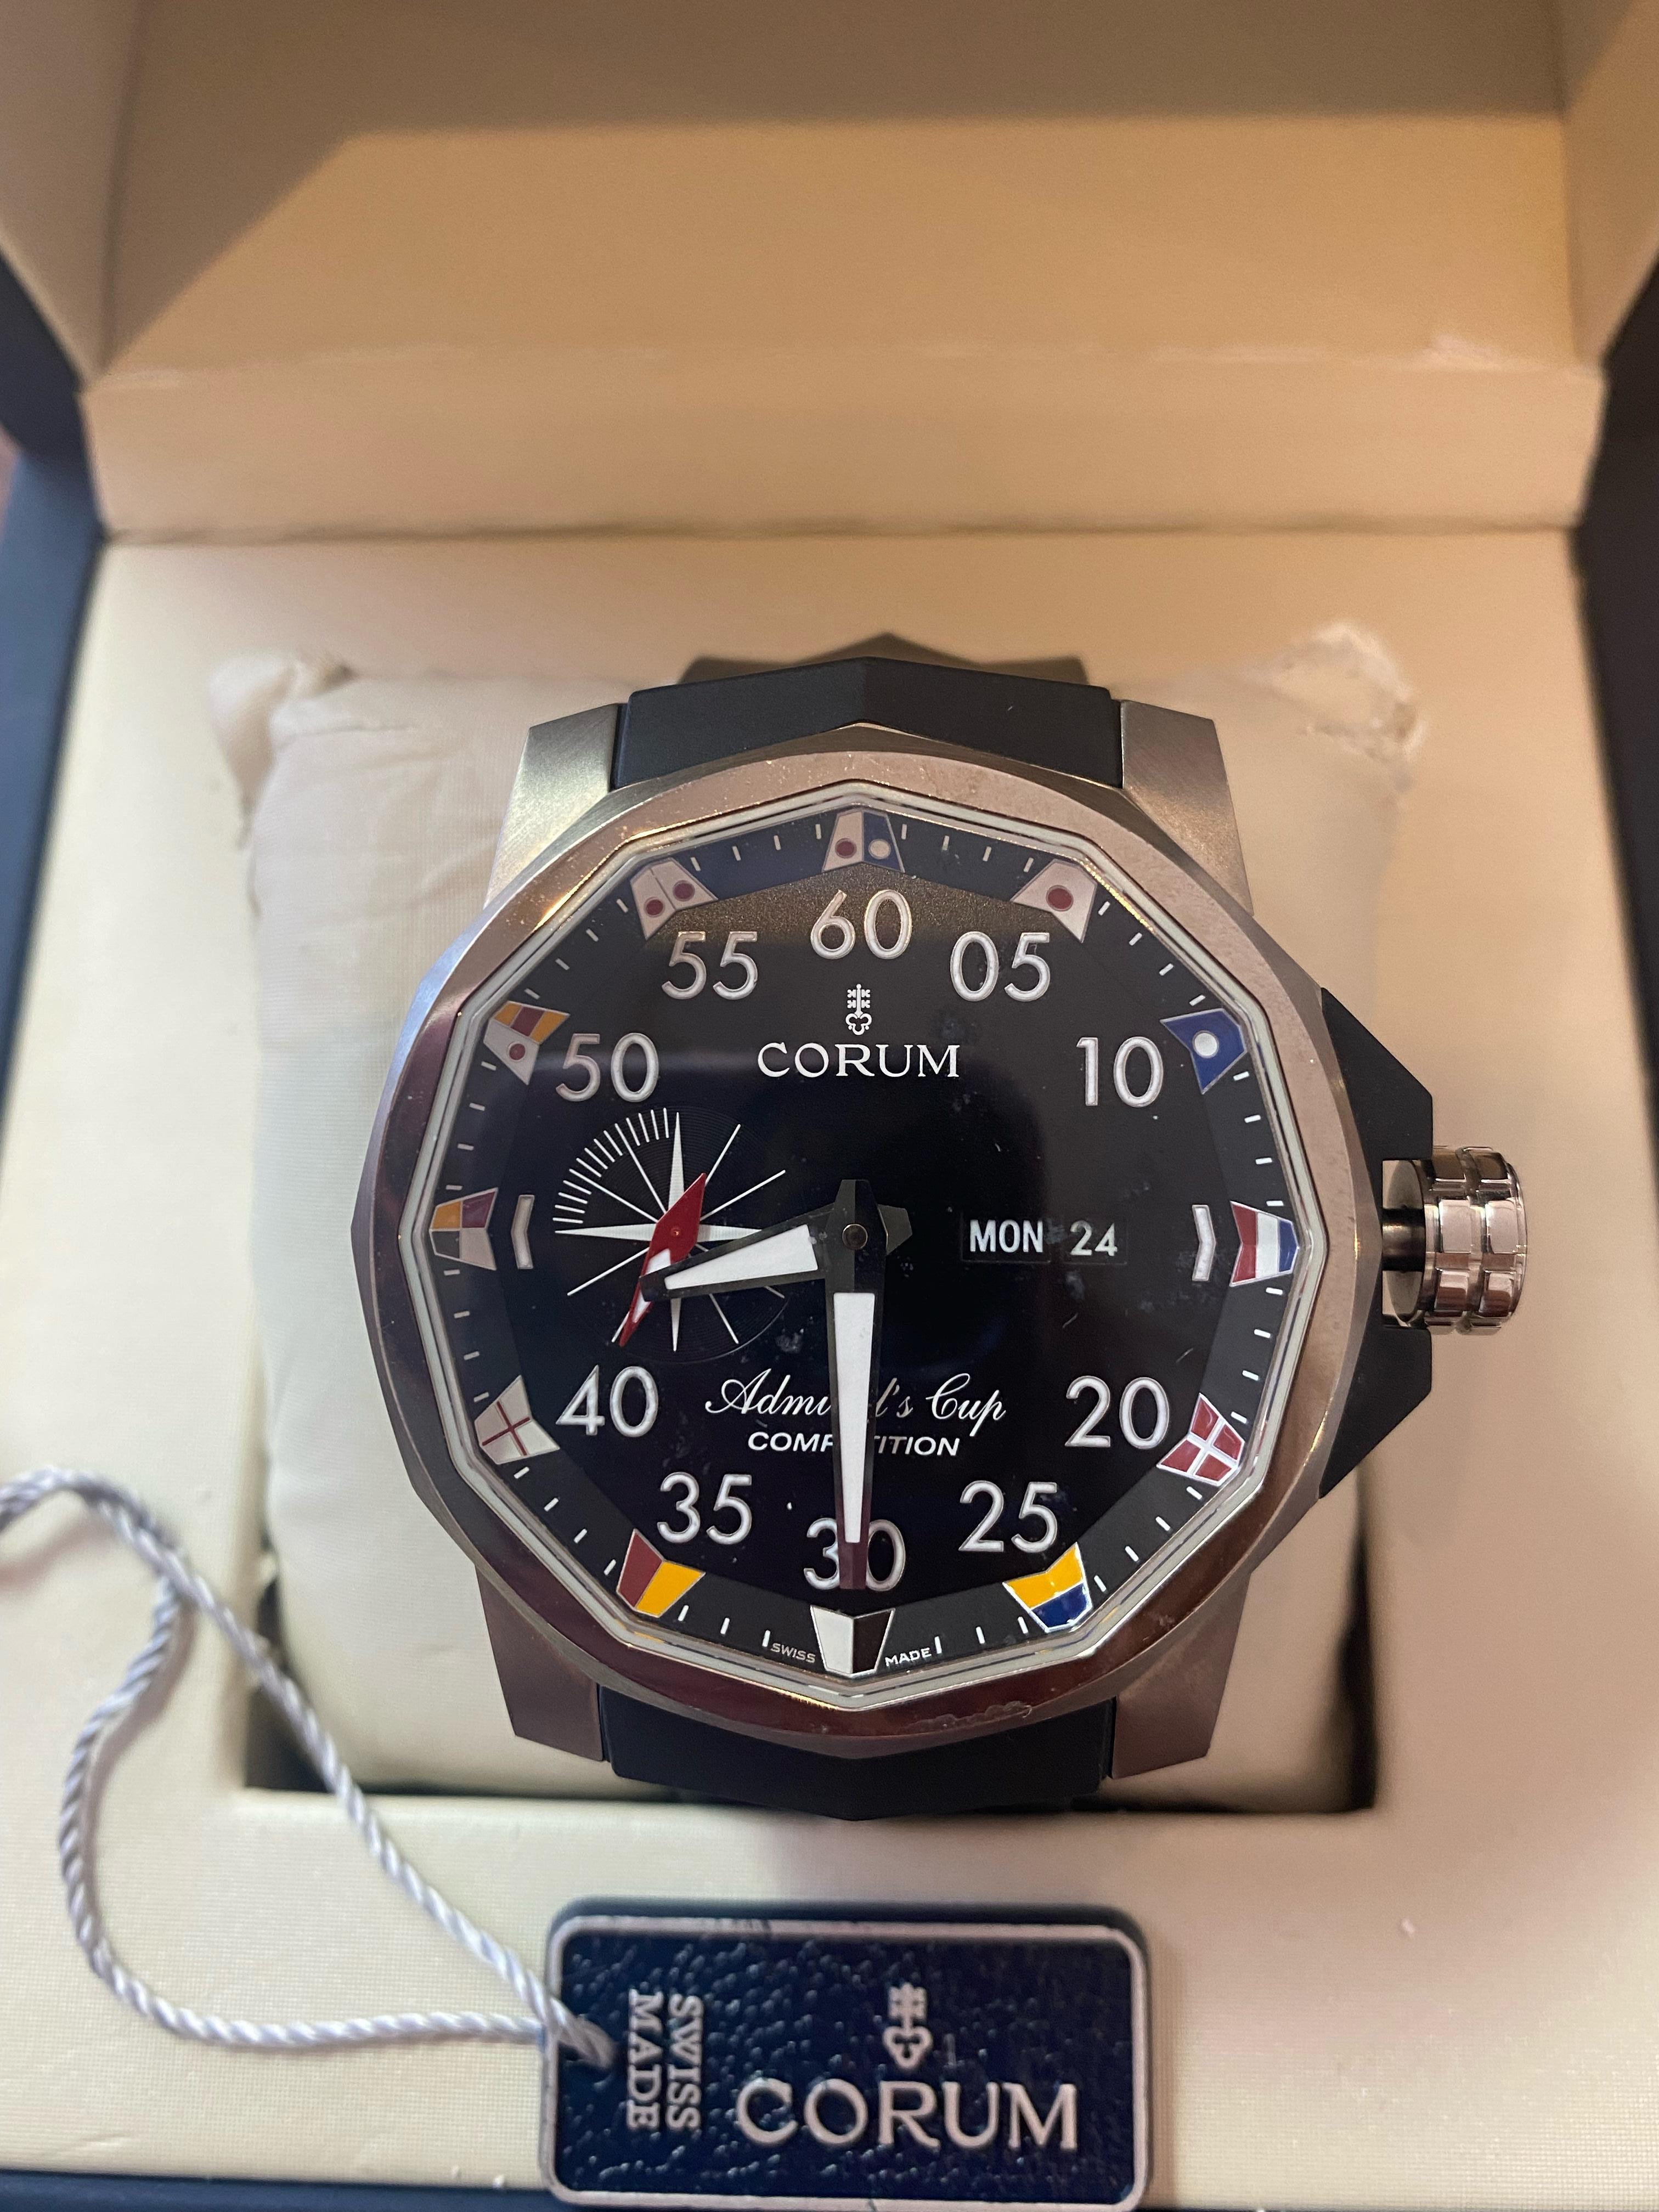 Corum Admiral's Cup Competition 48 featuring 10 international maritime signal flags in a polygonal bezel. 

Titanium represents the outstanding watchmaking spirit of the Swiss watchmaker, Corum. Swiss-made titanium with its signature polygonal